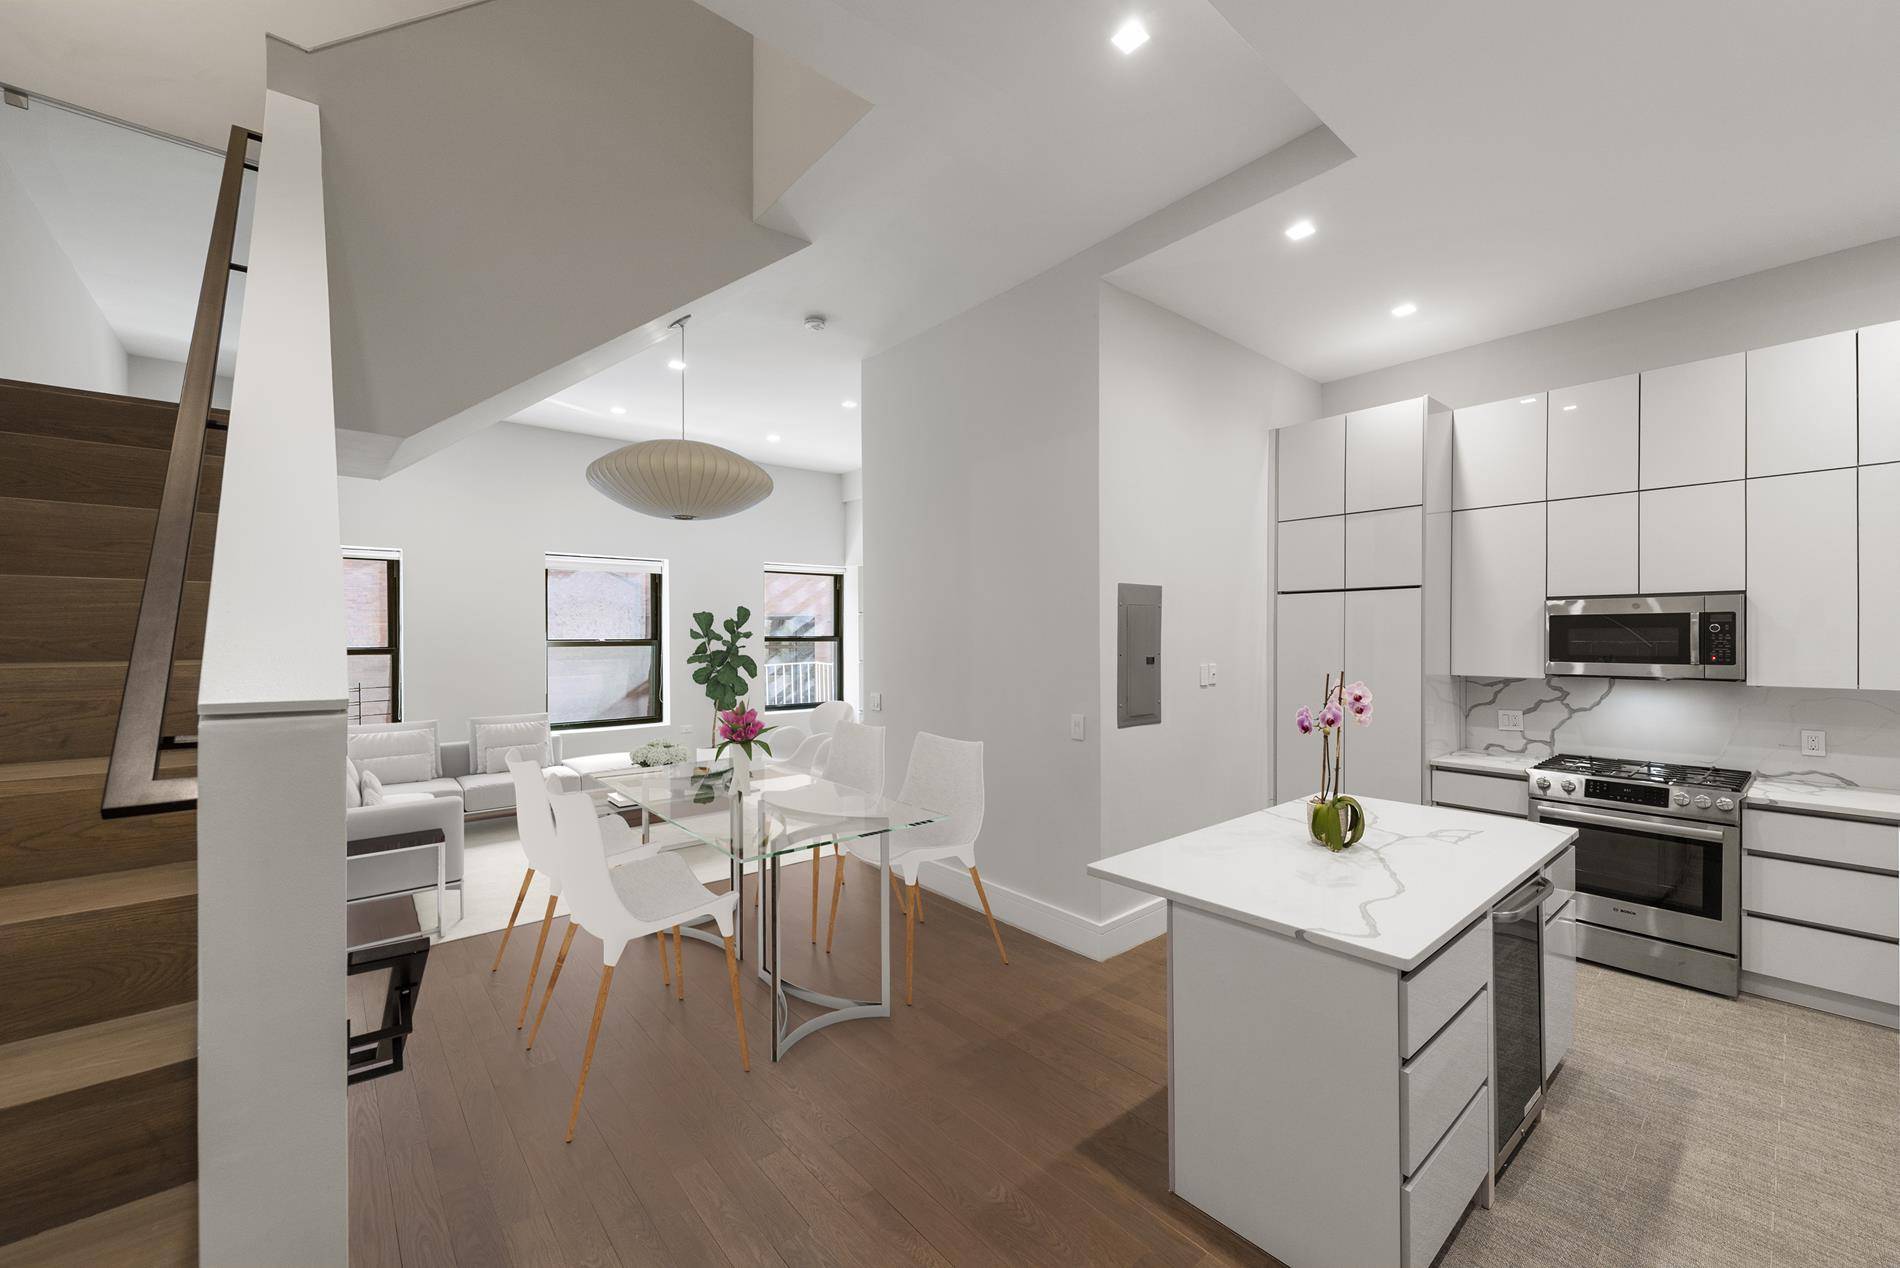 Triple Mint Two Bedroom Two Bath Renovated Loft with 16 ft ceilings in Iconic Doorman Building in Greenwich Village NohoYou will never want to leave this one of a kind ...